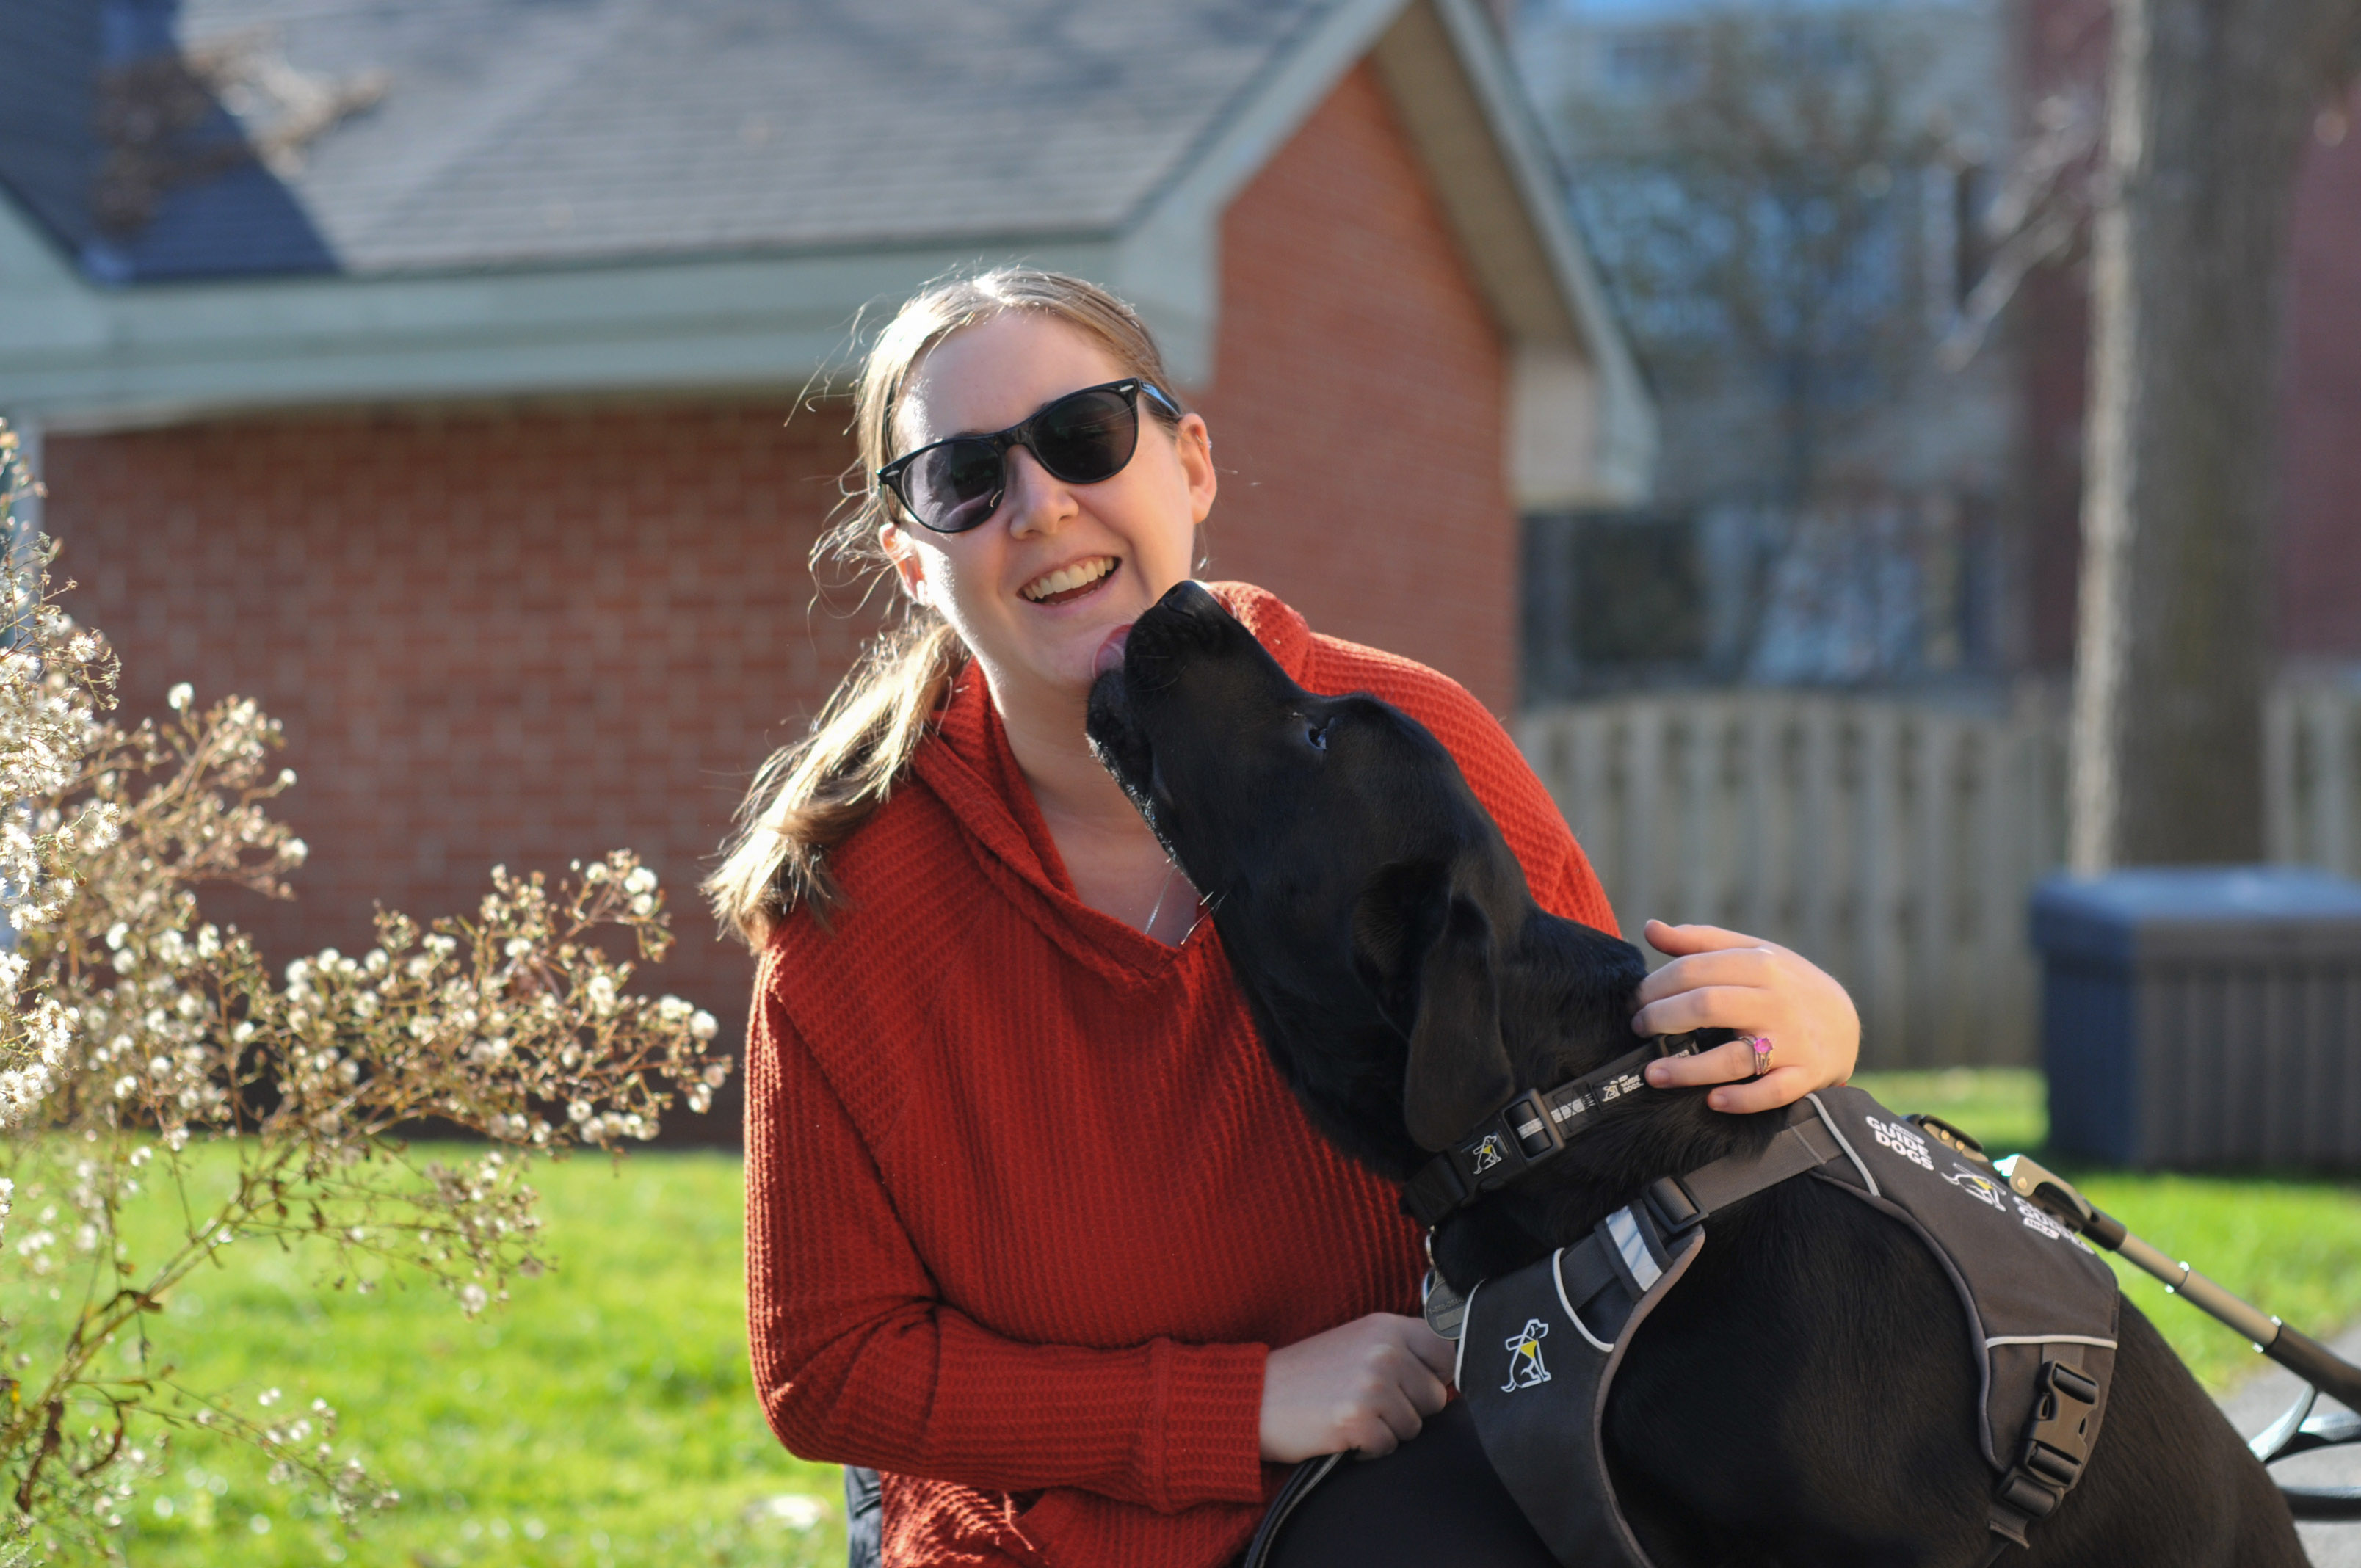 Christine kneeling with her CNIB Guide Dog, Edie. Edie is licking Christine's face who is smiling at the camera.